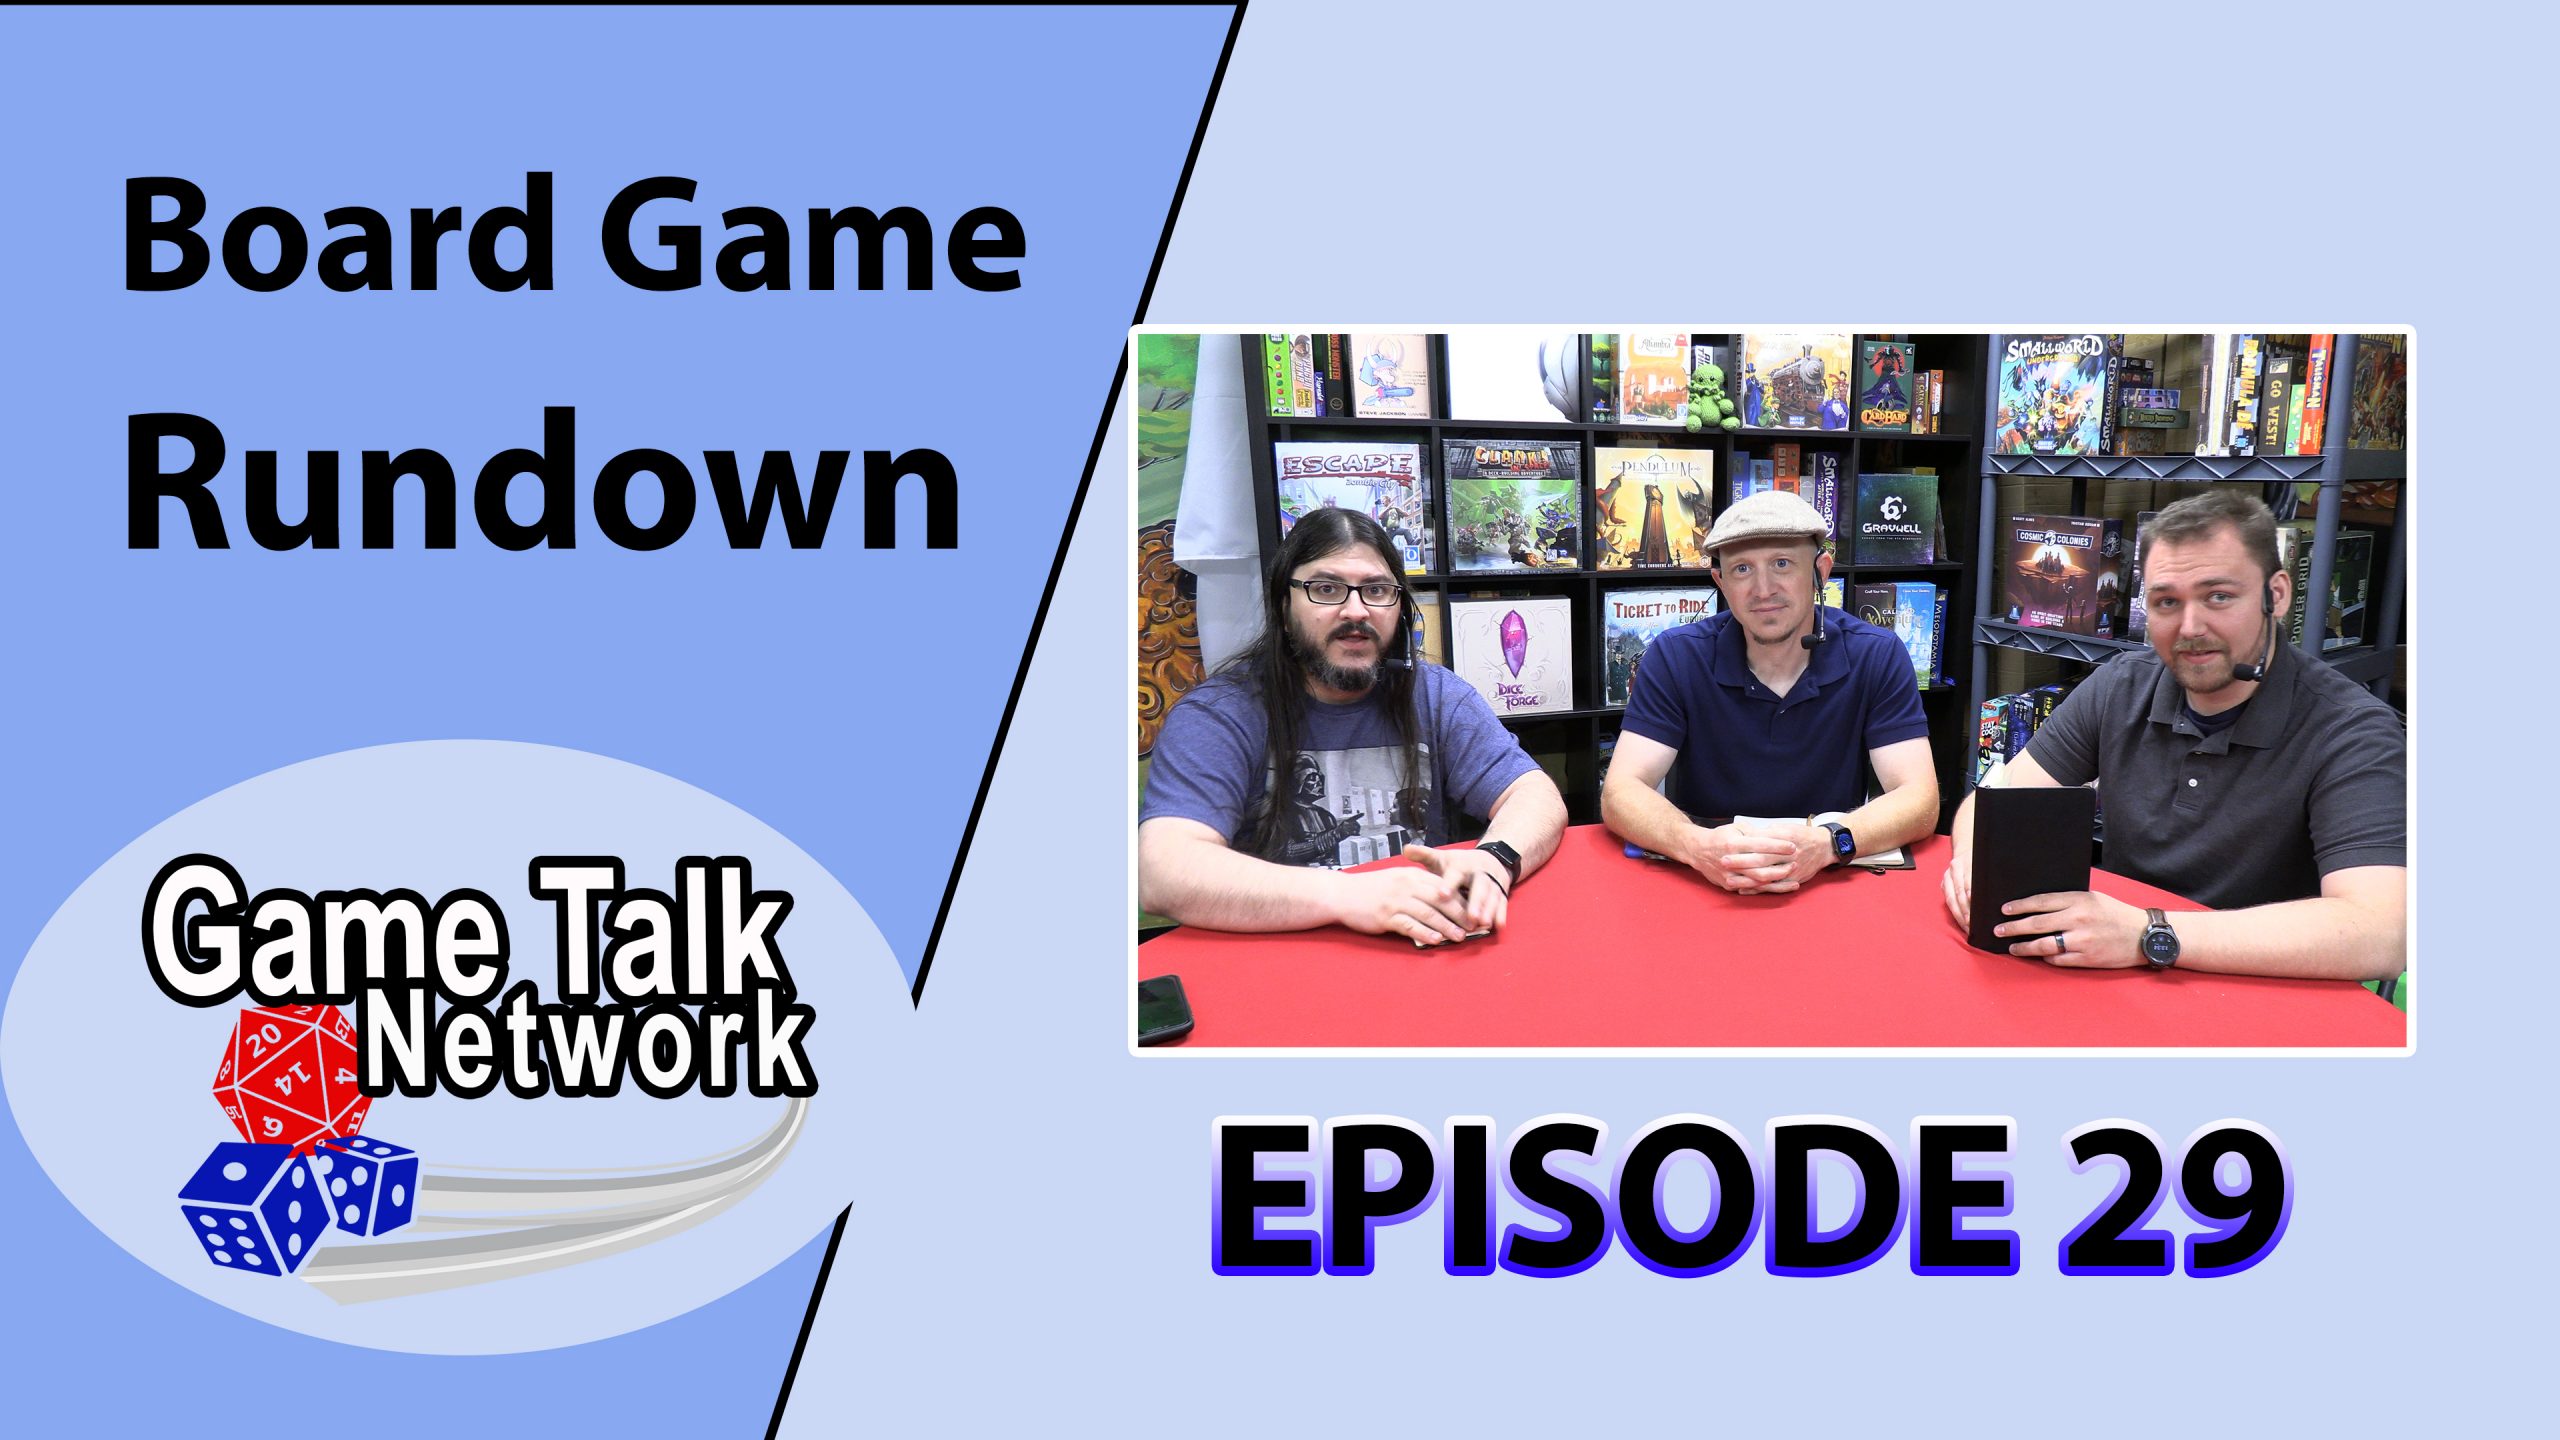 Board Game Rundown Episode 29: Jargon and Expletives